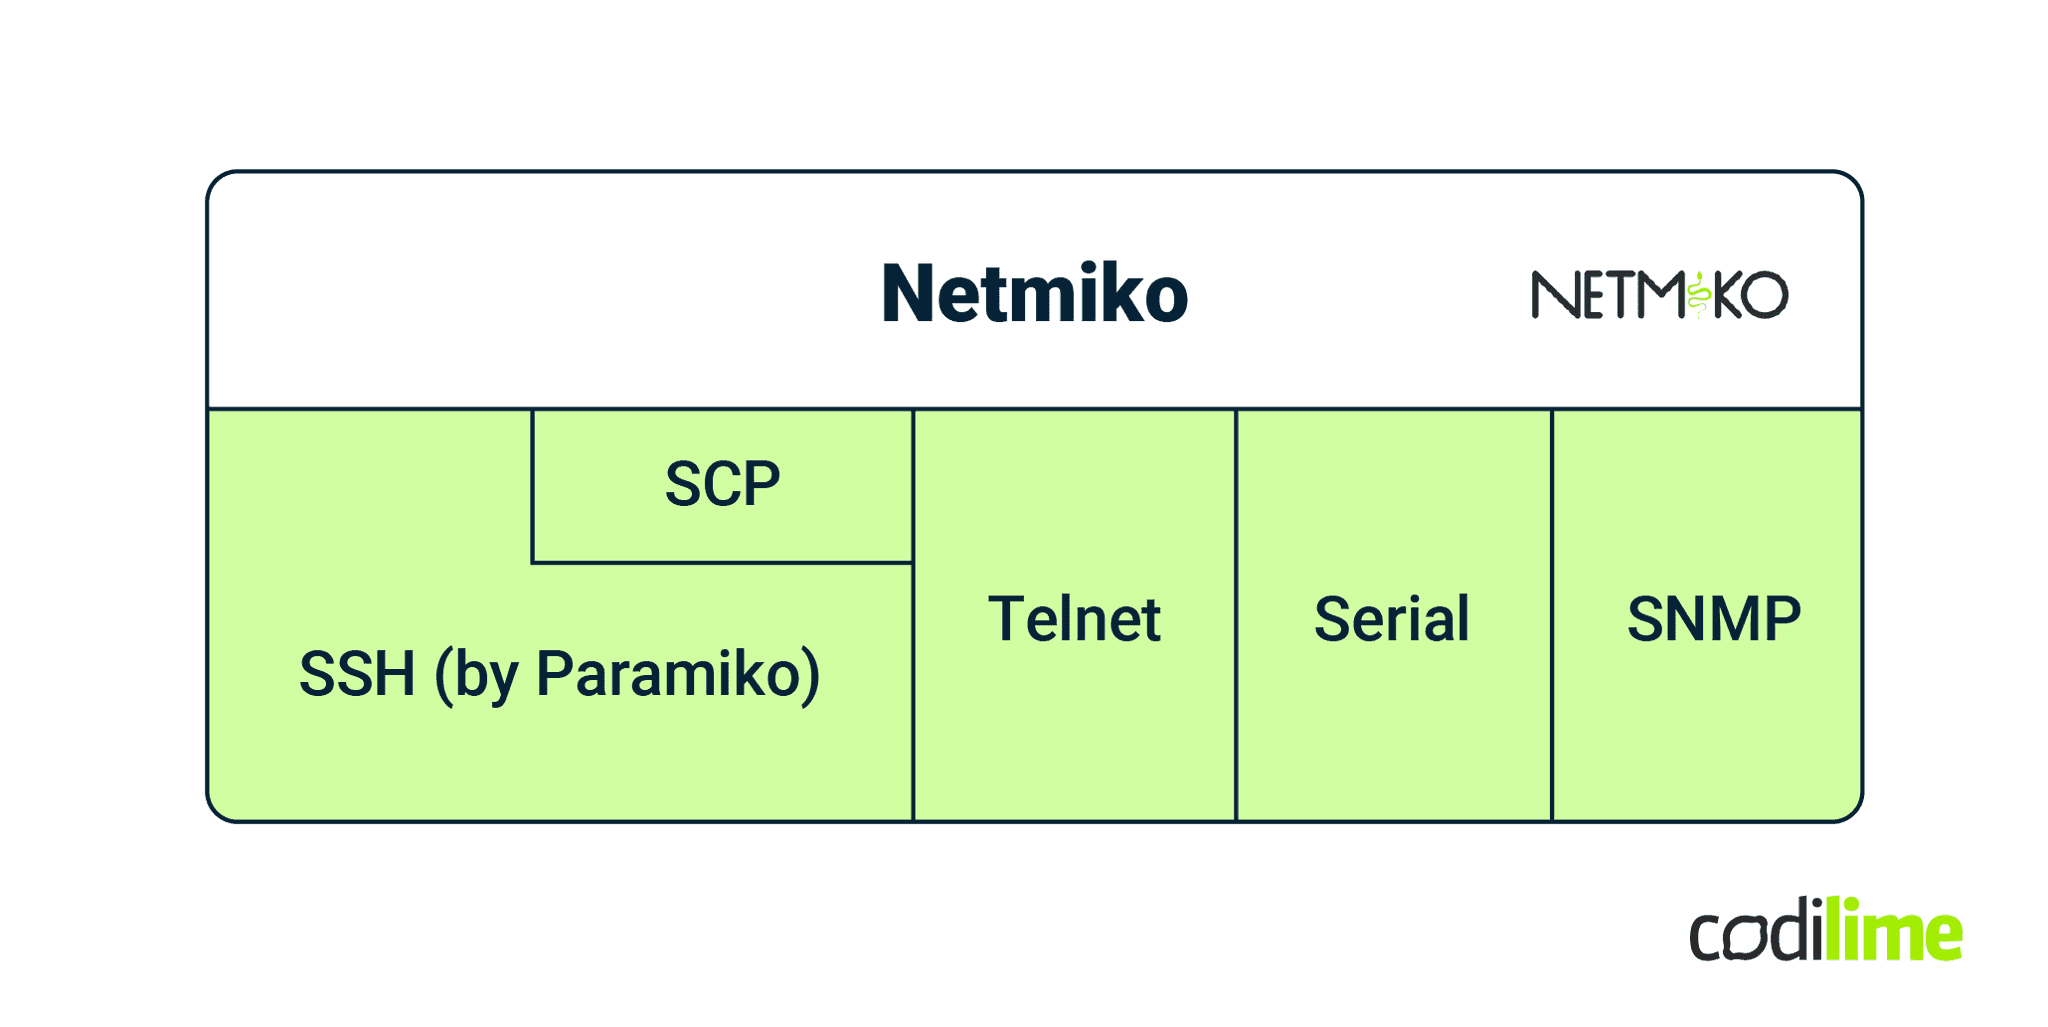  Communication protocols supported by Netmiko